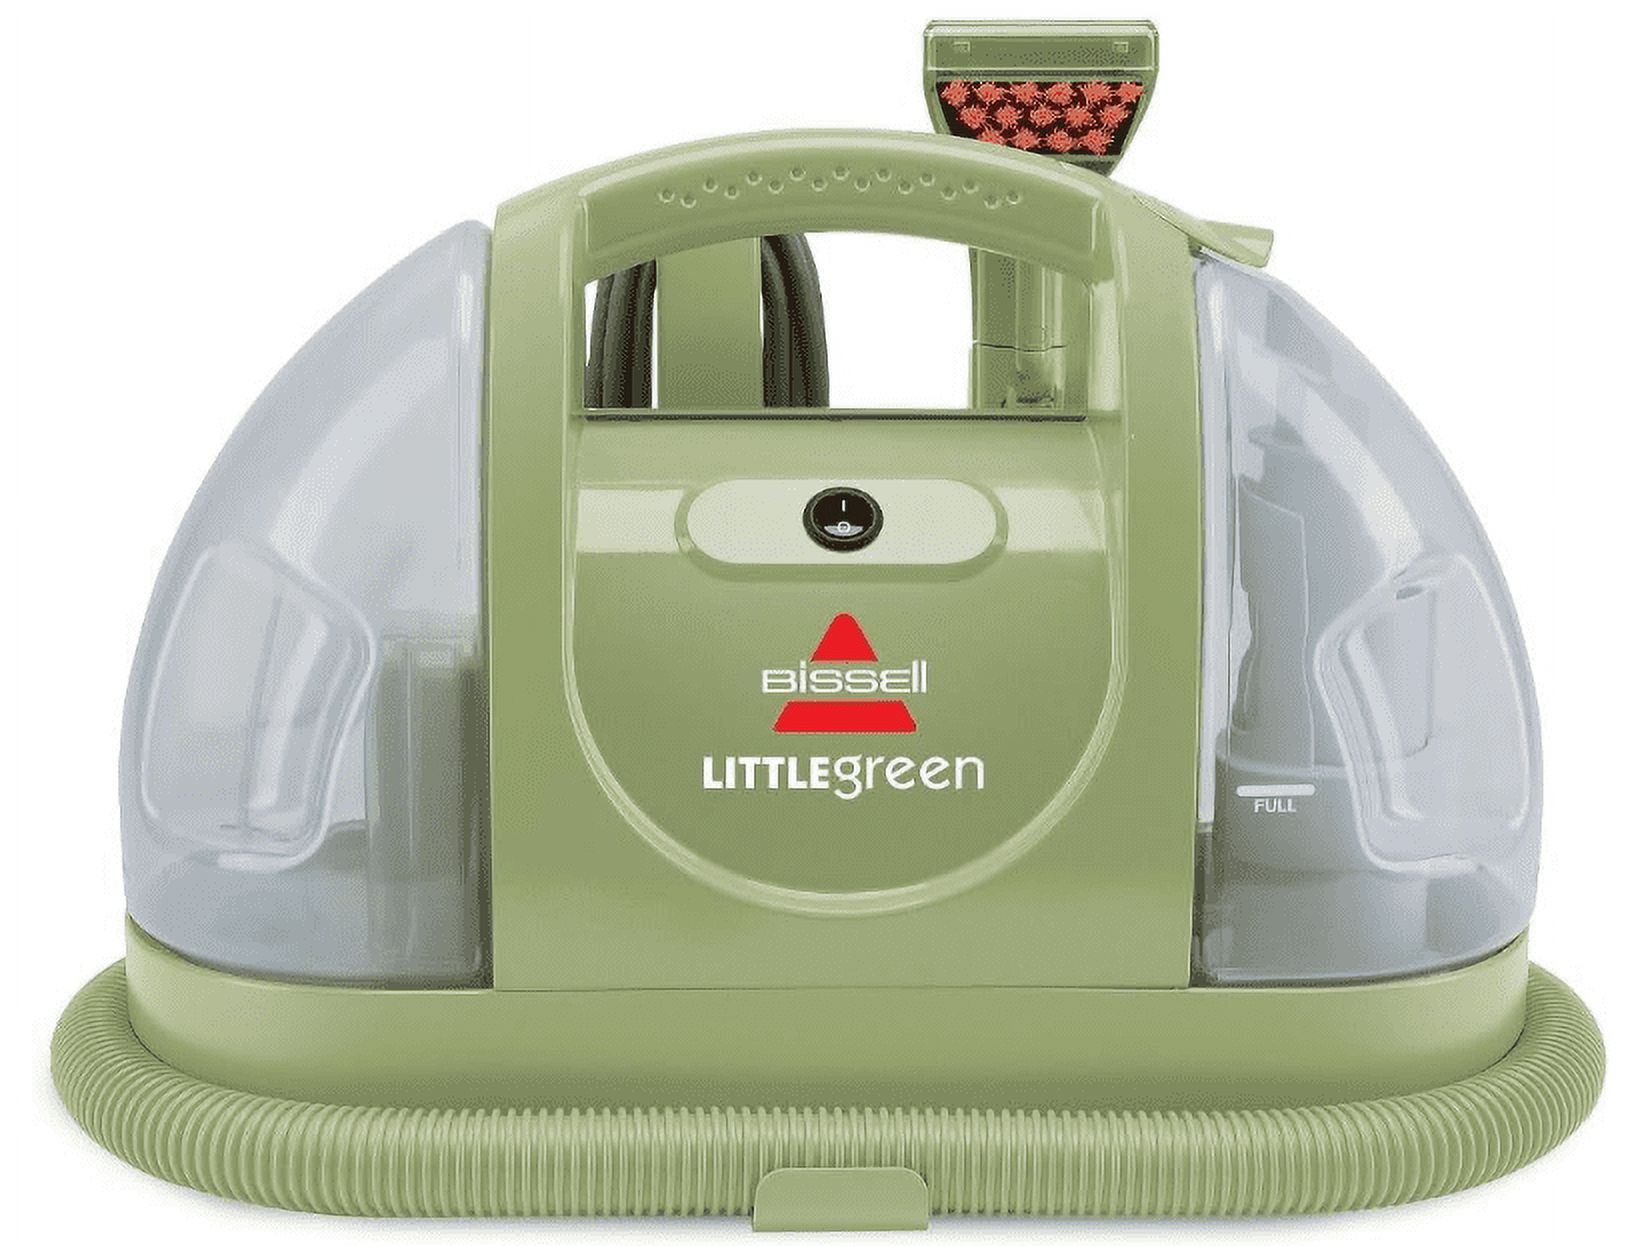 Bissell Multi-Purpose Portable Carpet and Upholstery Cleaner, 1400B, Green - image 1 of 2